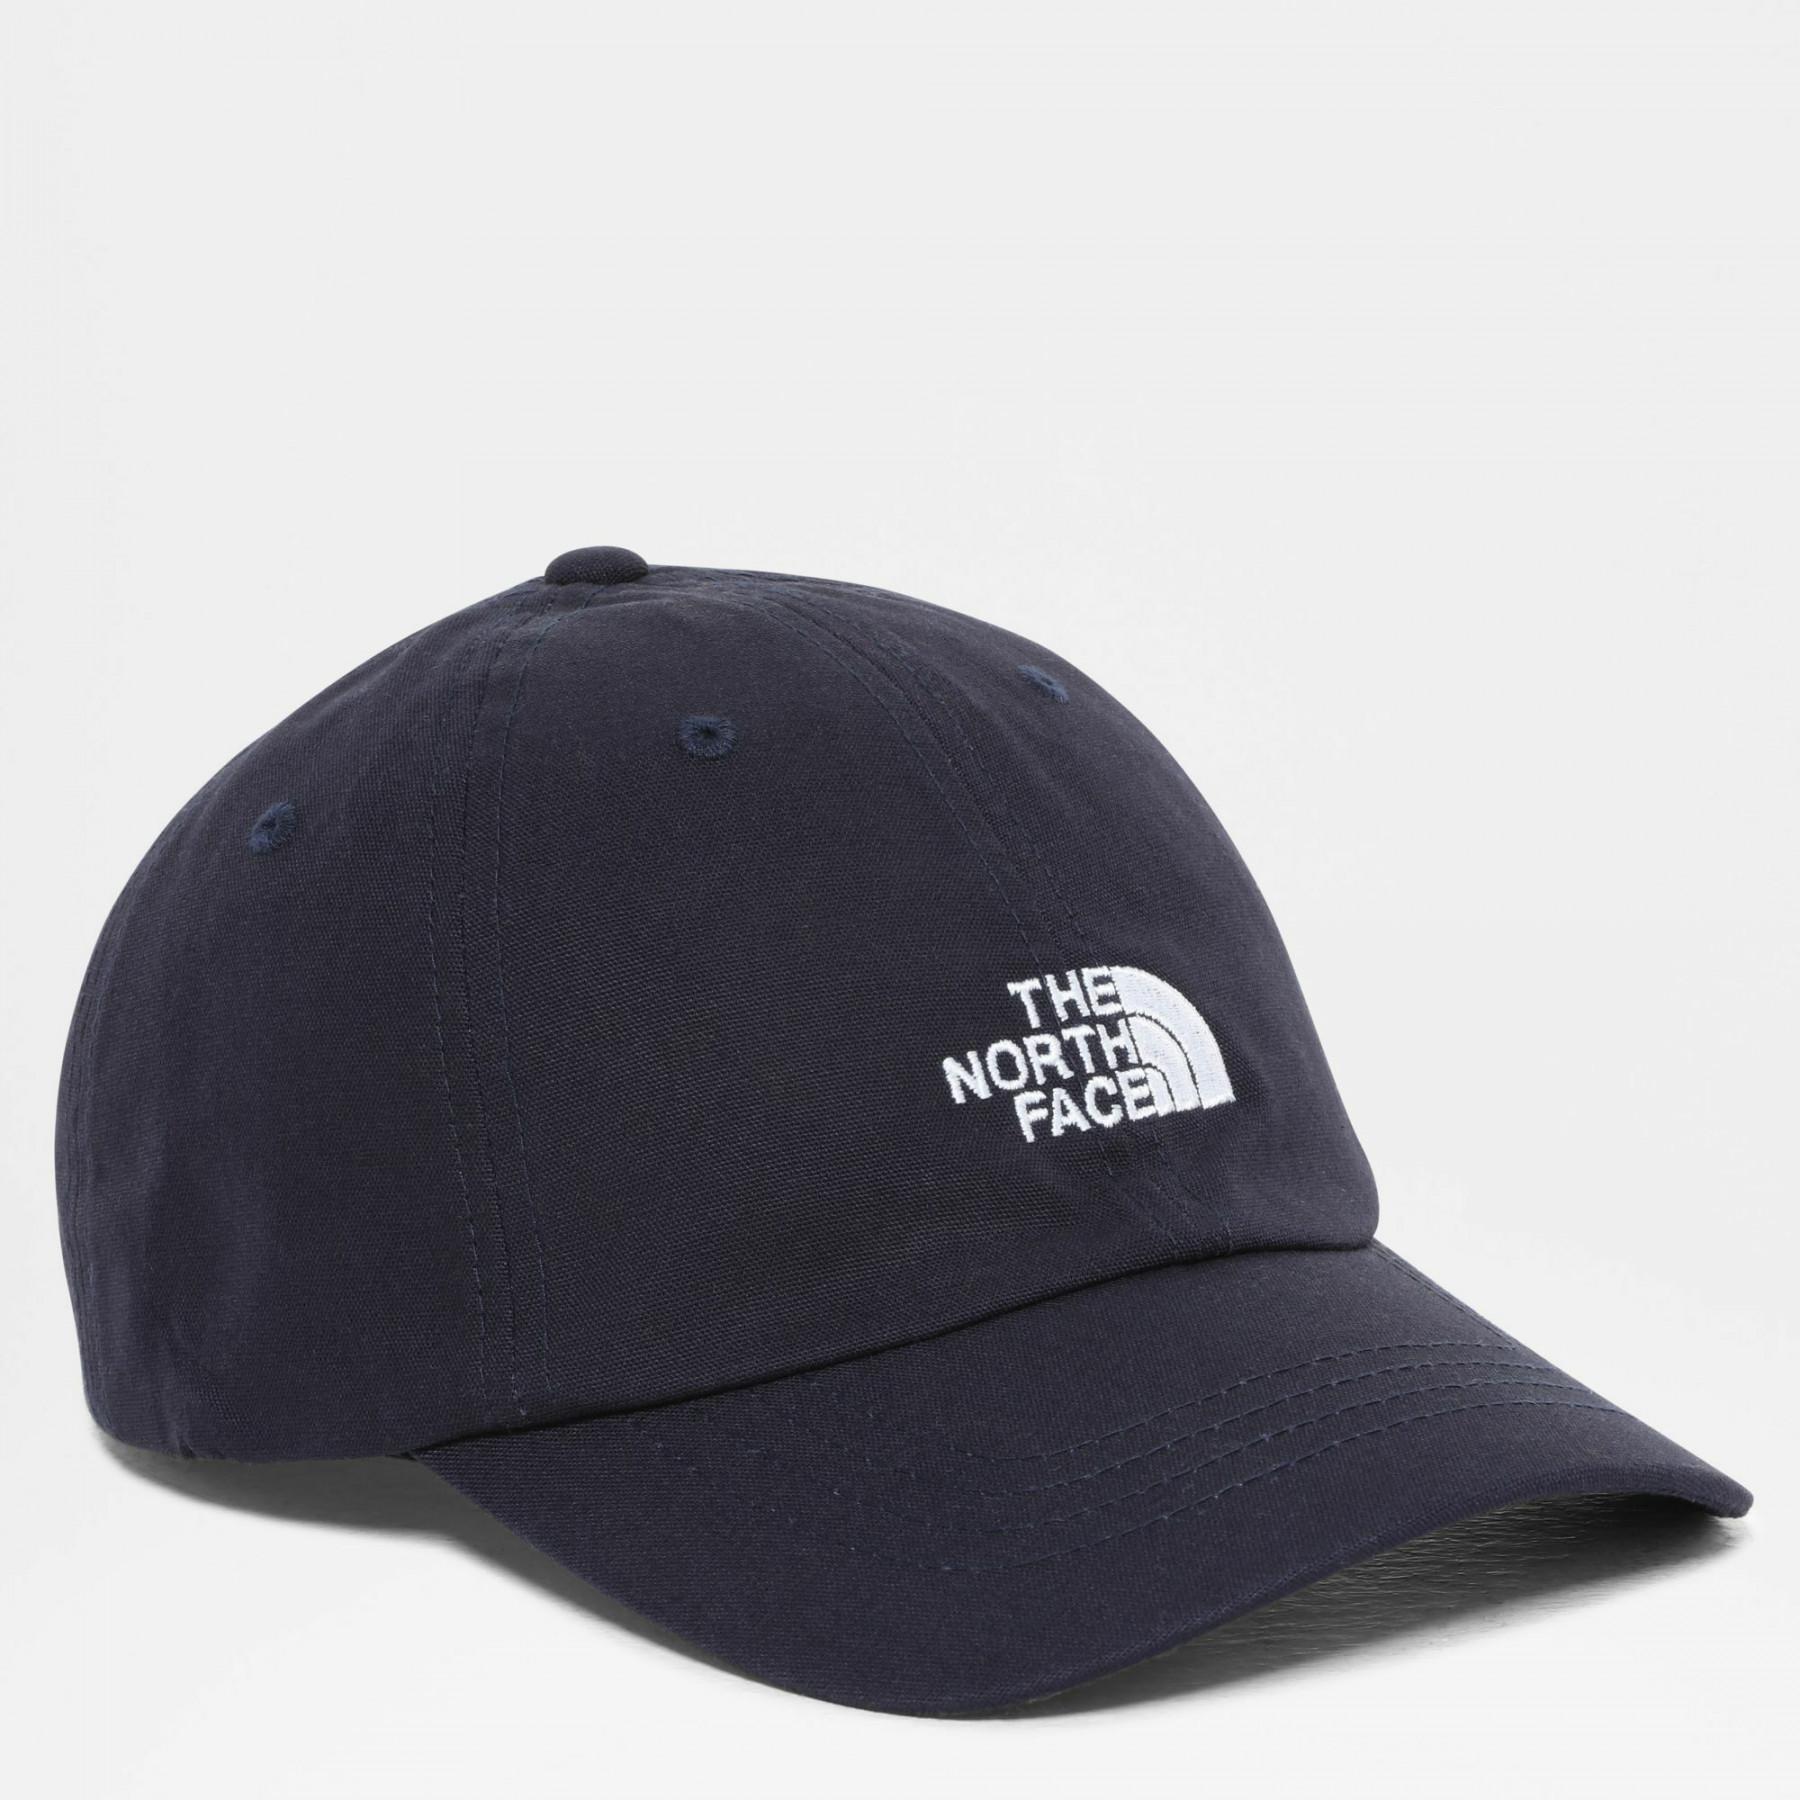 Kappe The North Face Norm